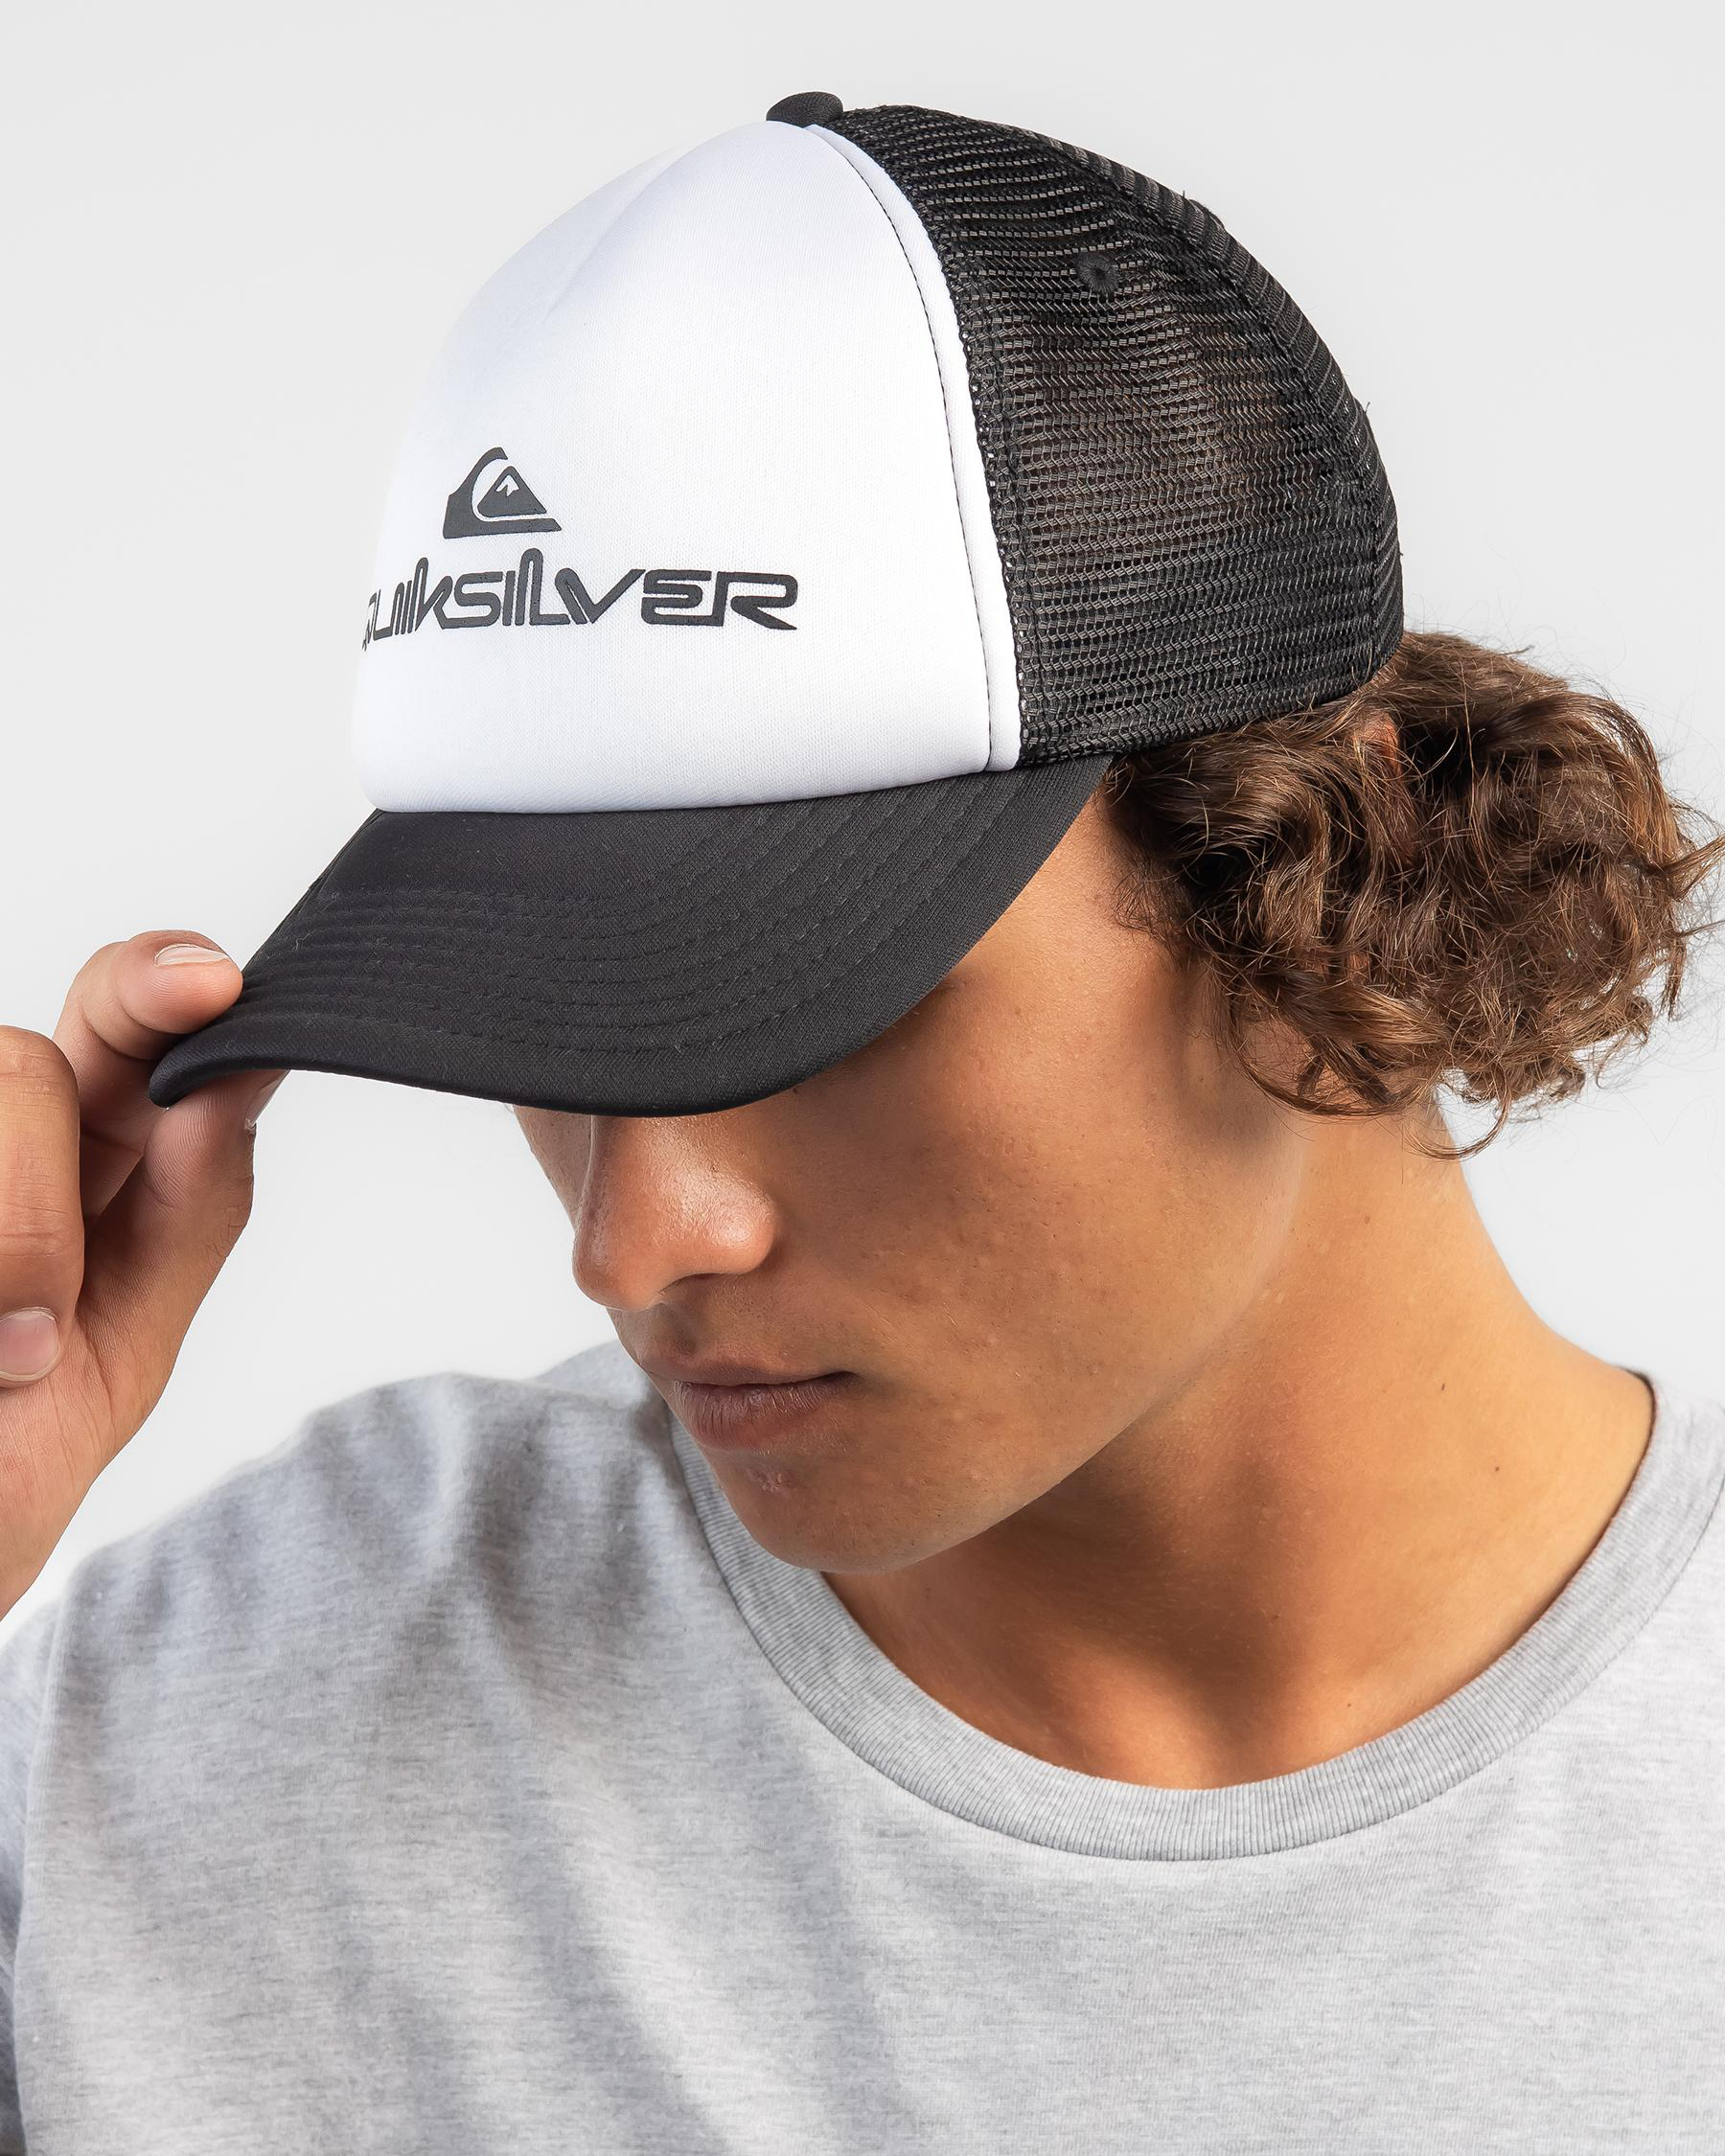 Quiksilver Omnistack Trucker Cap In White - FREE* Shipping & Easy Returns -  City Beach United States